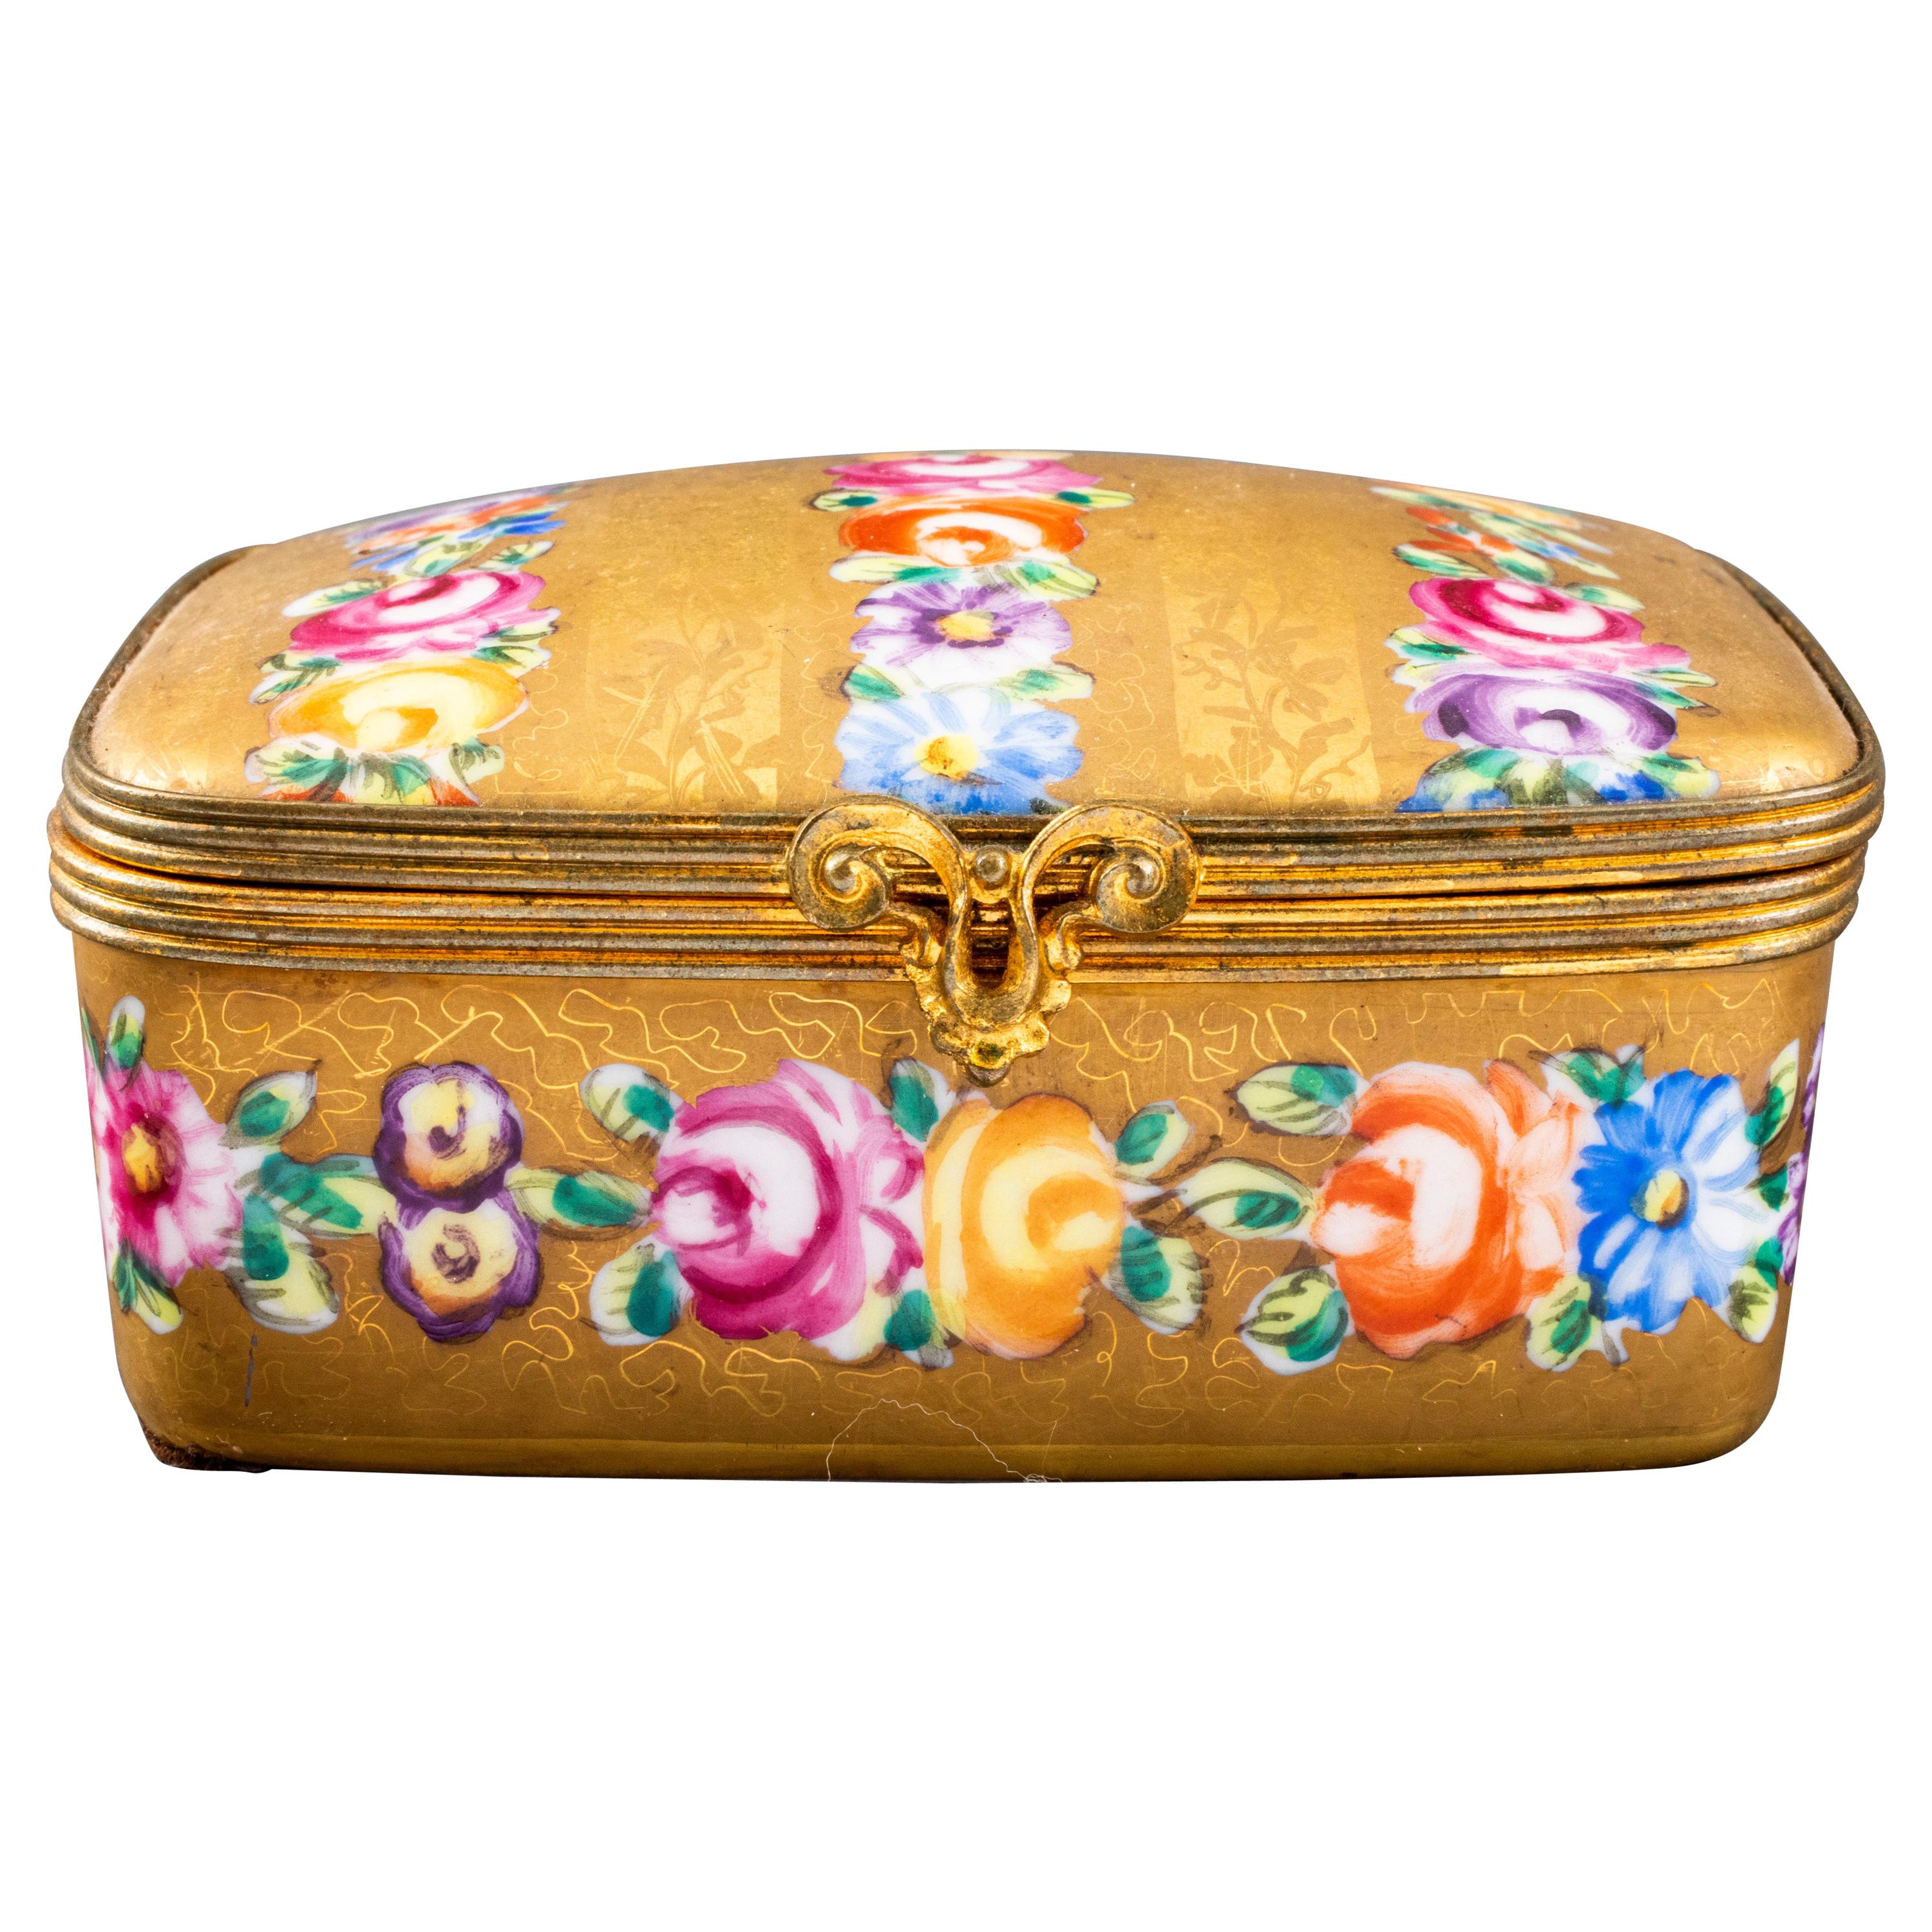 Le Tallec French Hand-Painted Porcelain Jewelry Box